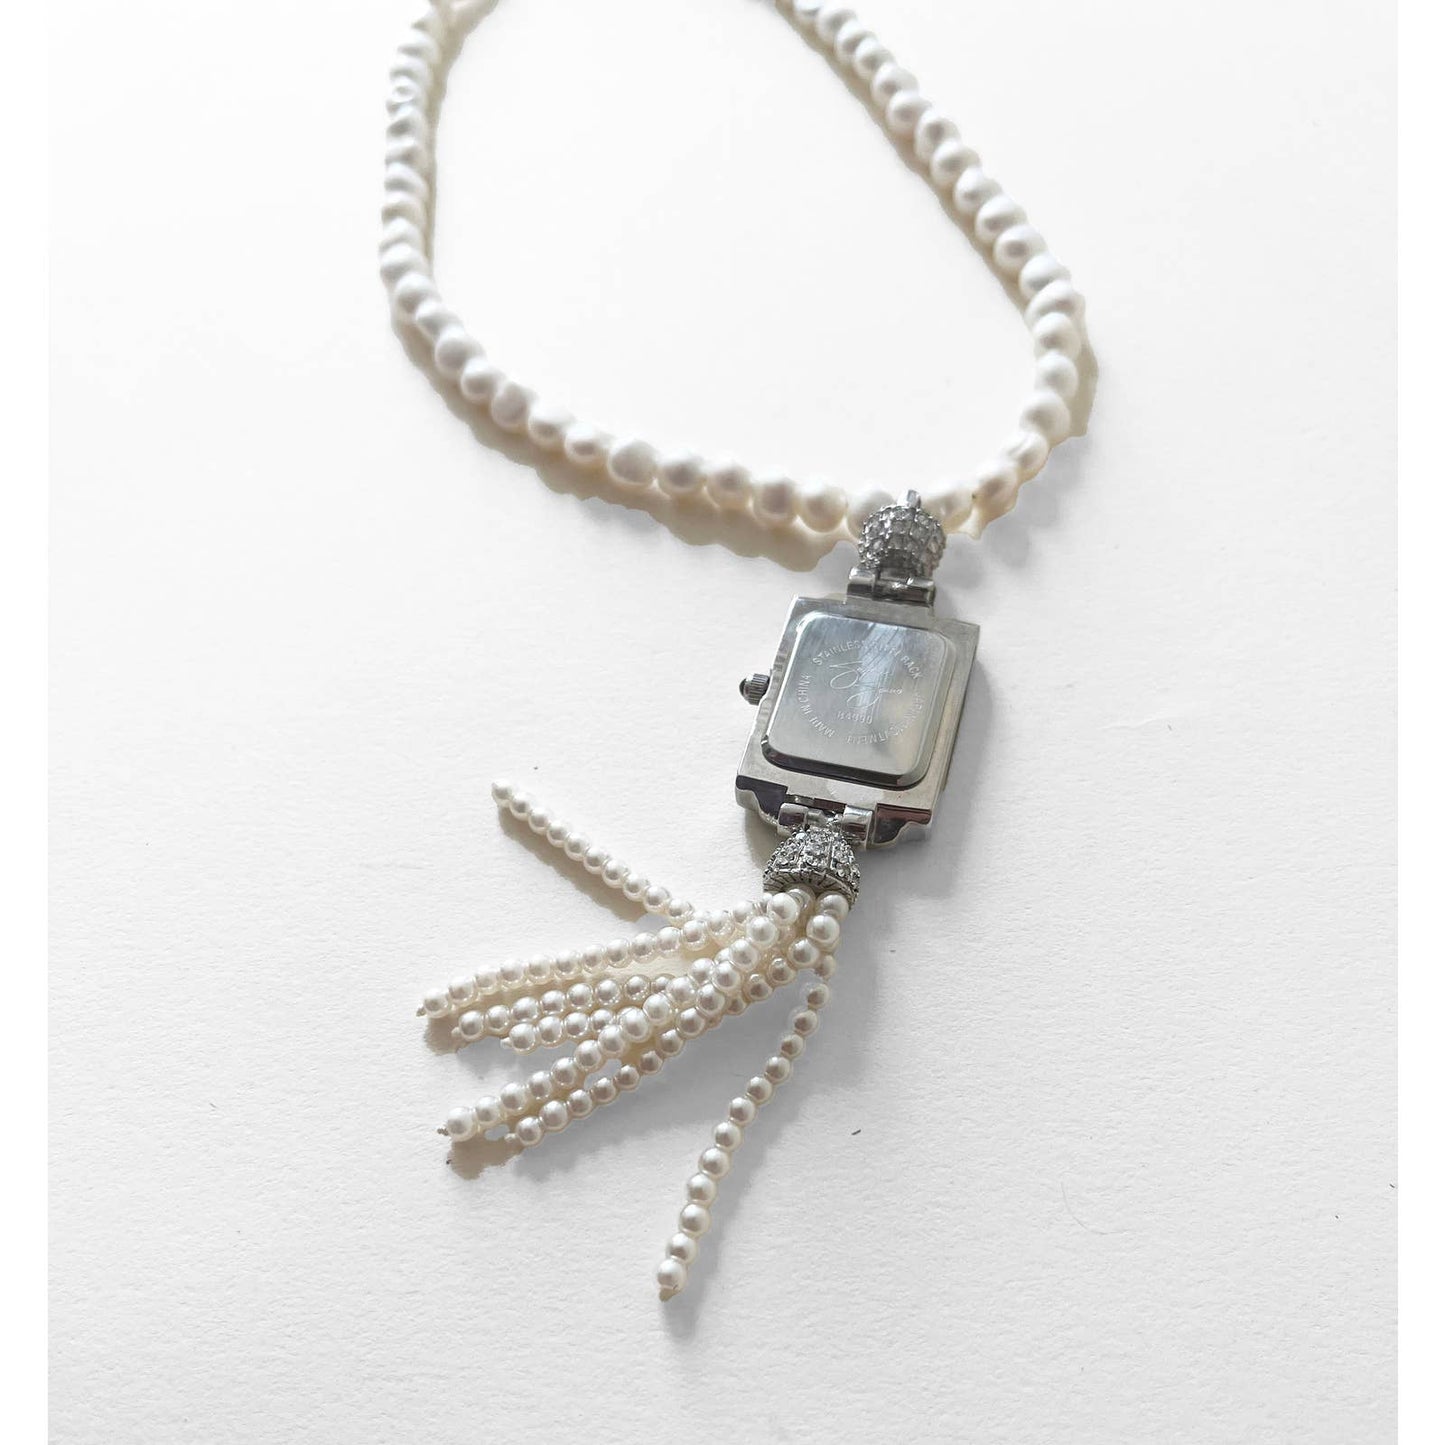 Watch Necklace | Vintage One of a Kind Watch Choker with Pearl Details